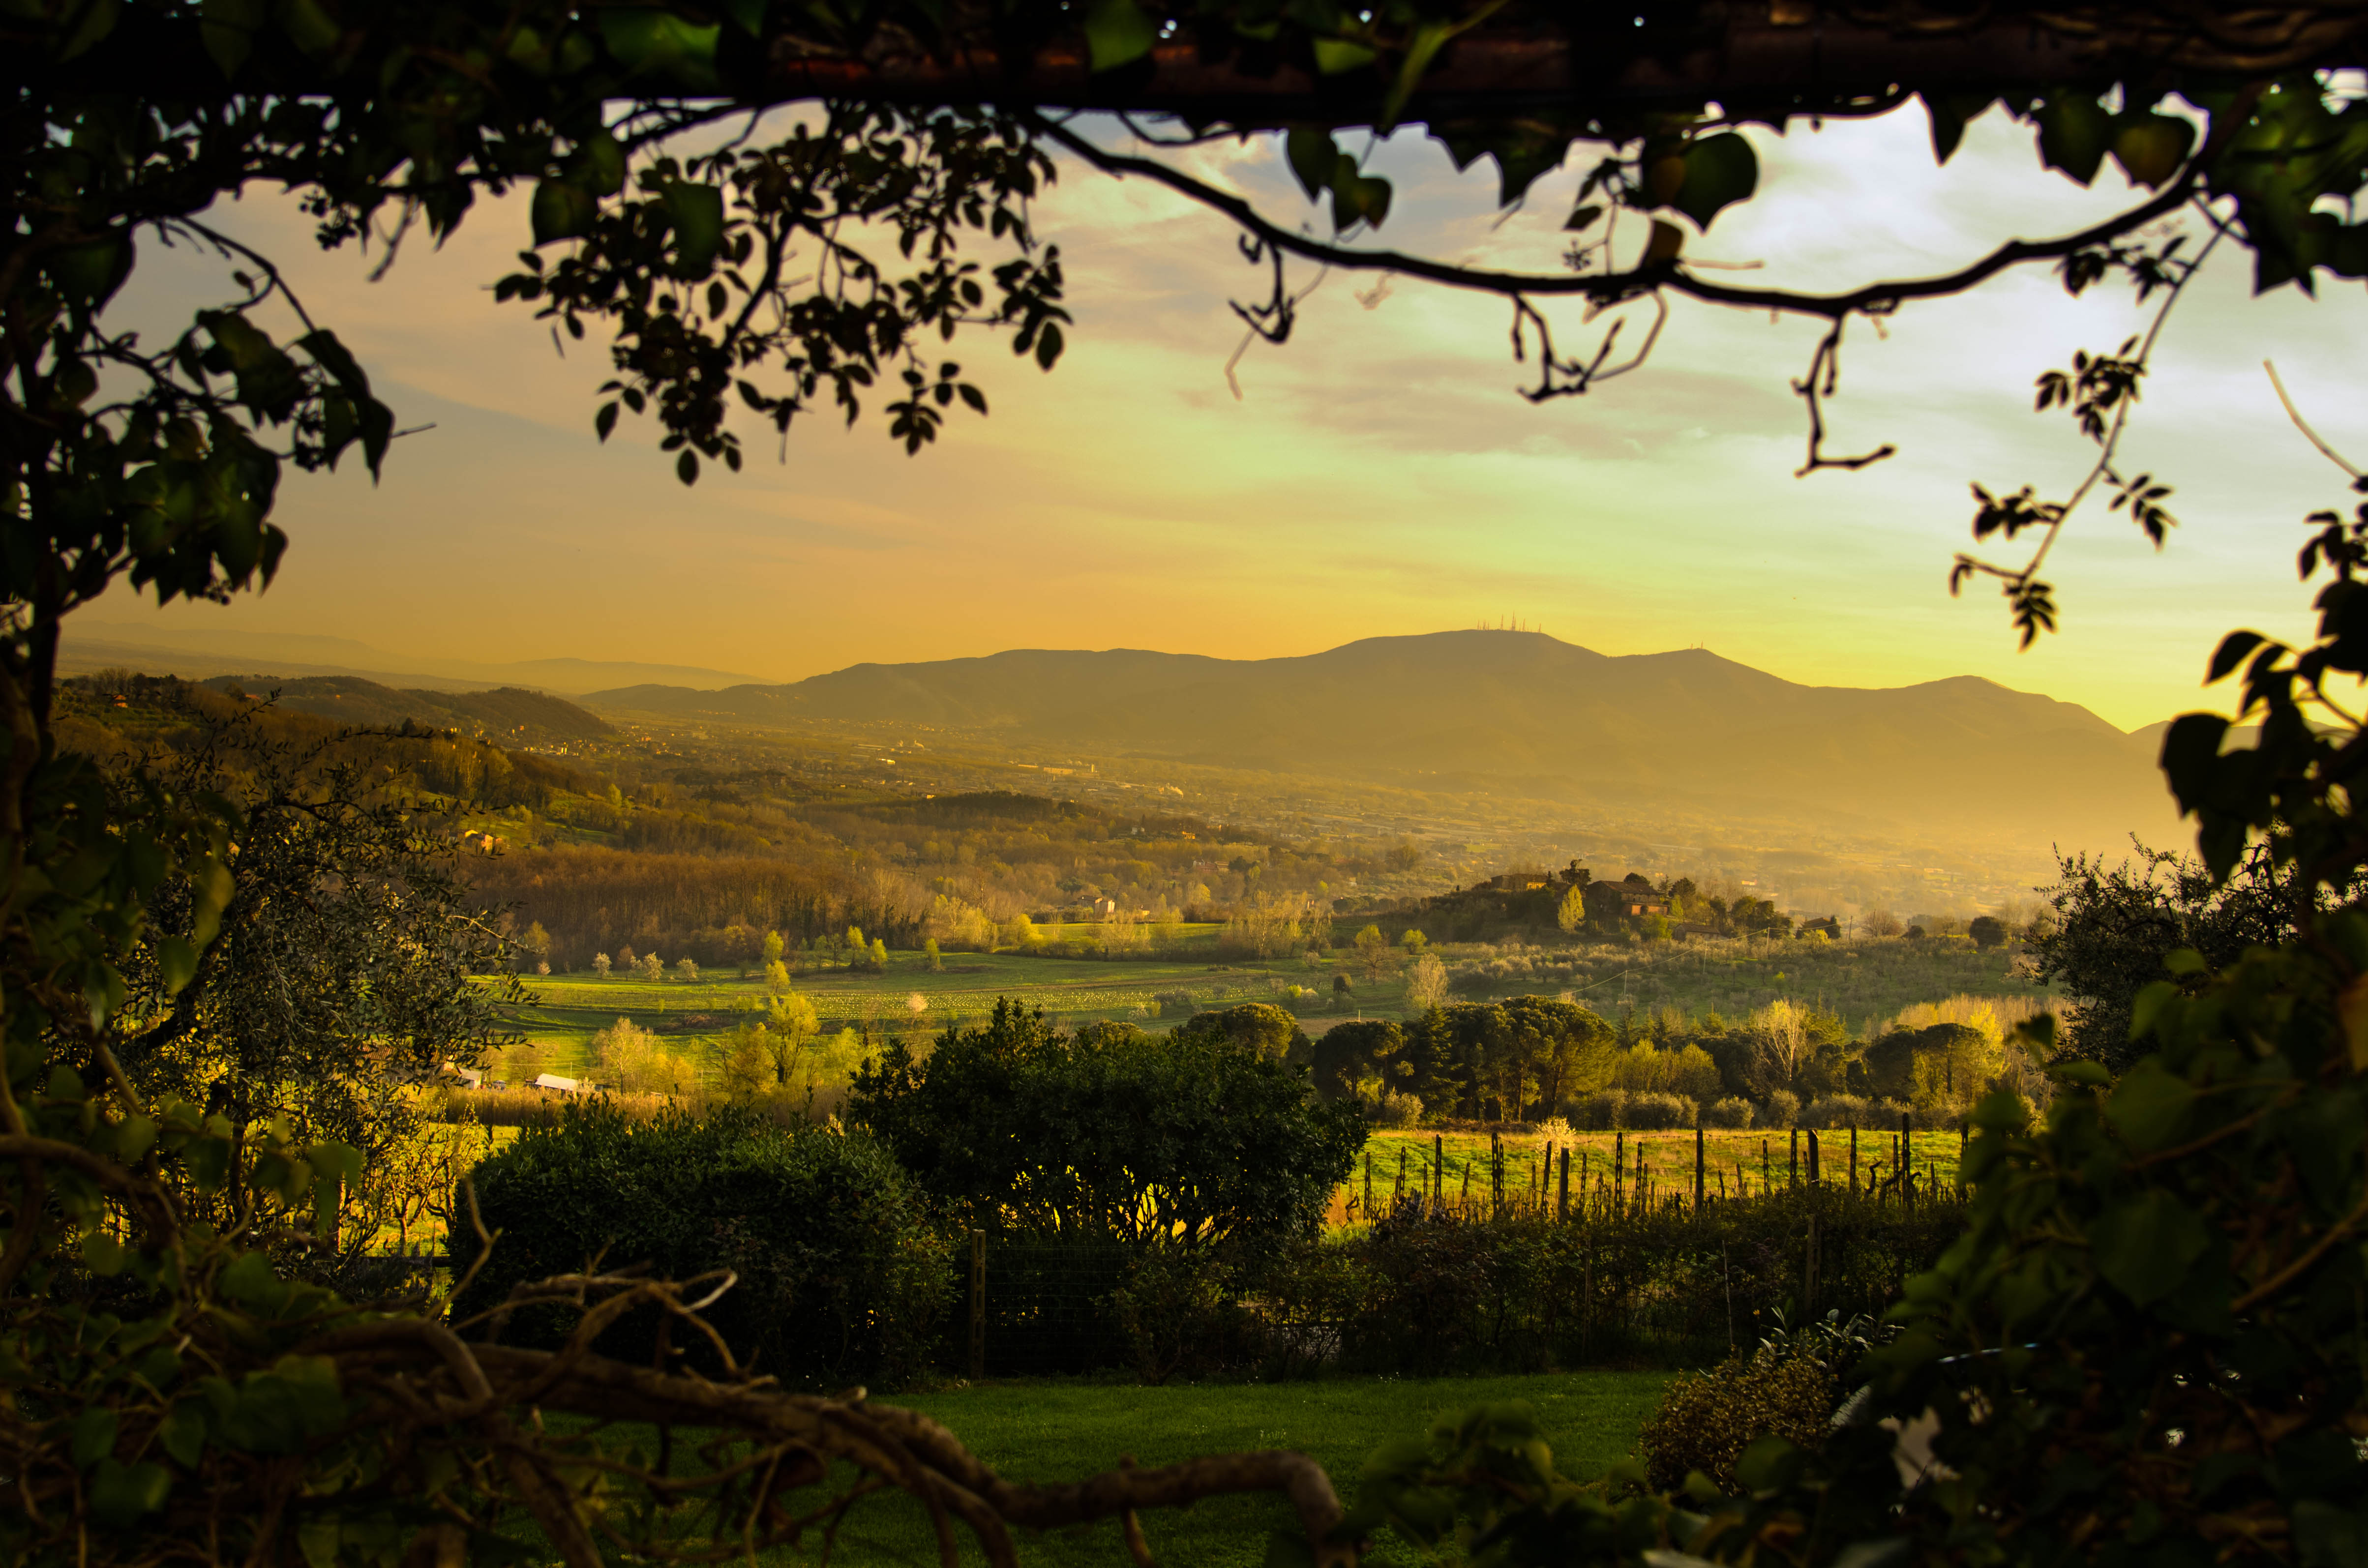 Setting sun over Tuscany Valley | photo page - everystockphoto